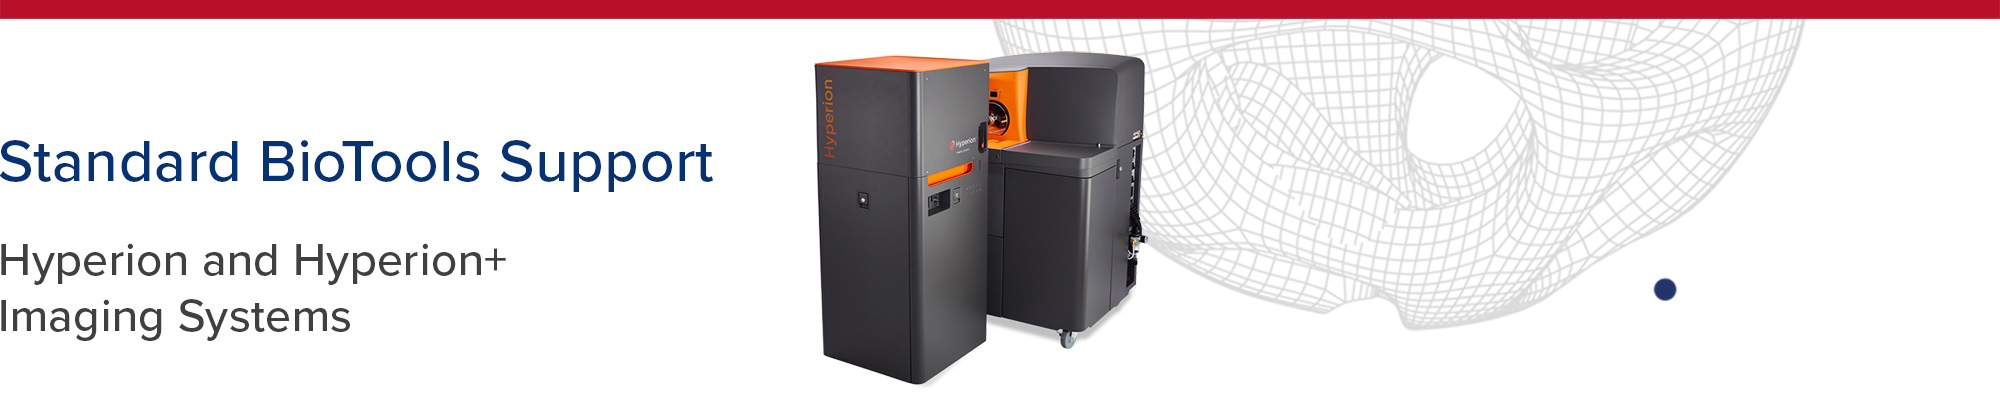 Fluidigm Support - Hyperion™ and Hyperion+™ Imaging systems